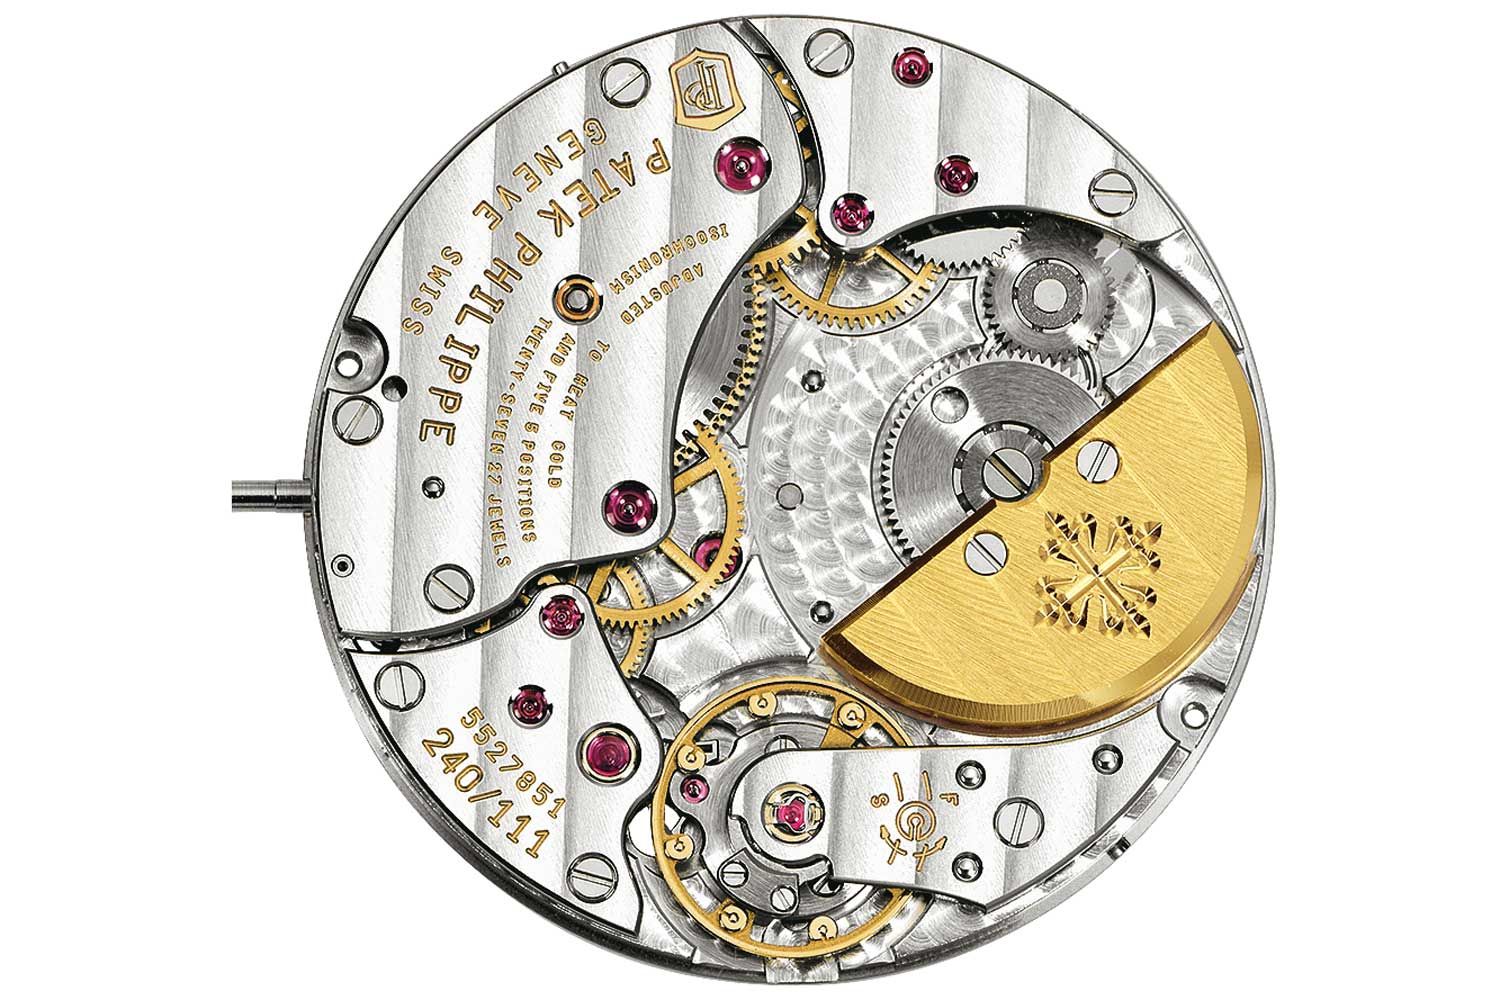 The mythical Patek Philippe caliber 240 launched in 1977